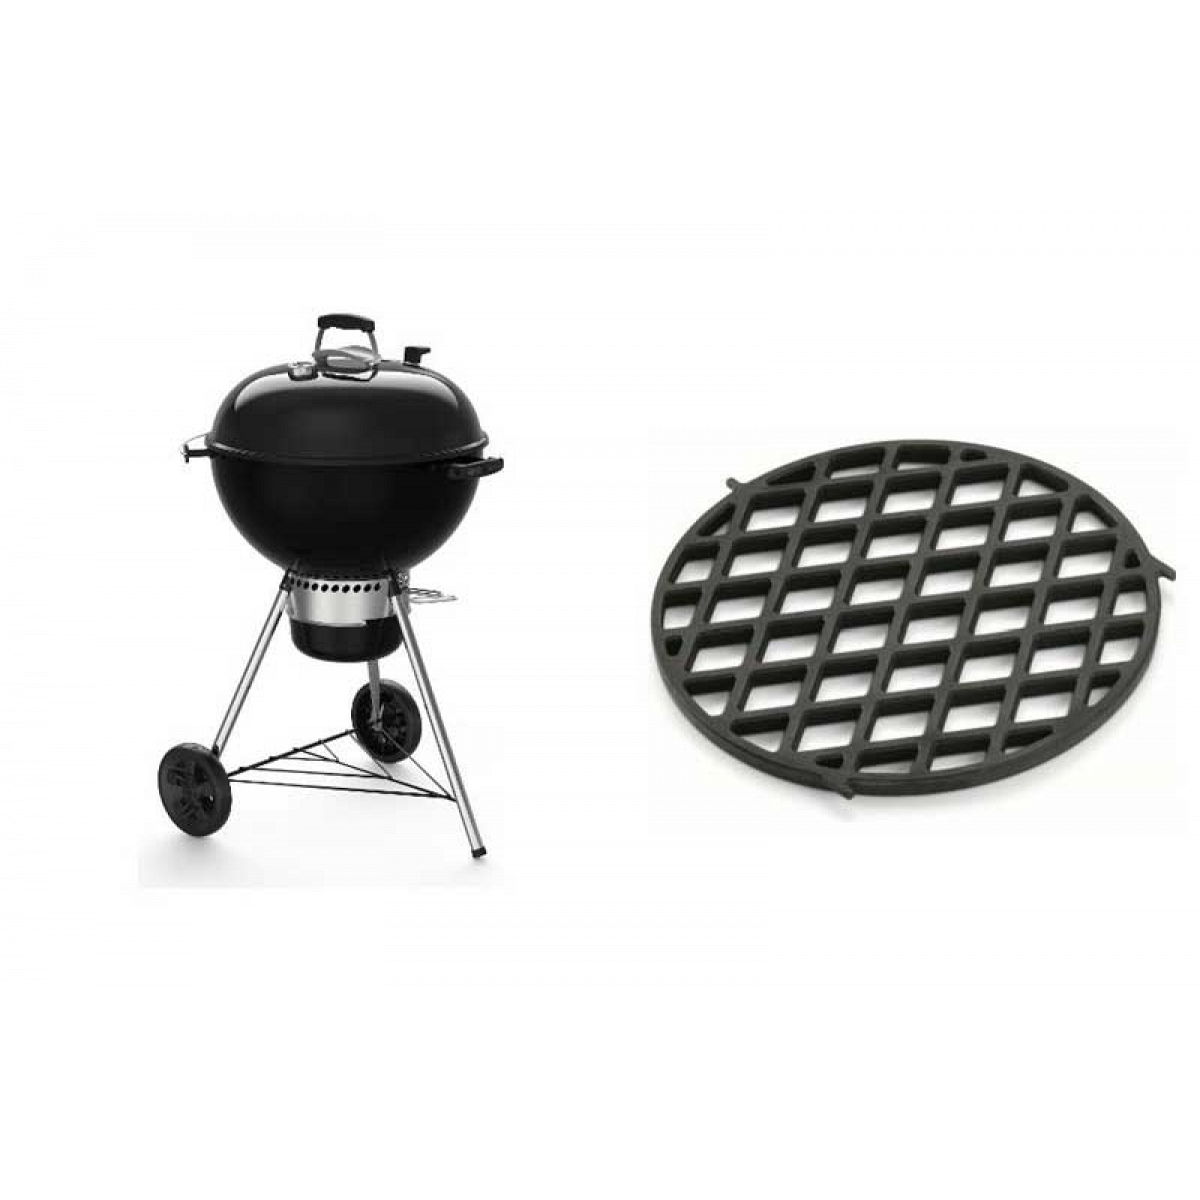 Weber Barbecue Weber a Carbone Master-Touch 57 cm GBS E-5750 Black Cod 14701053 